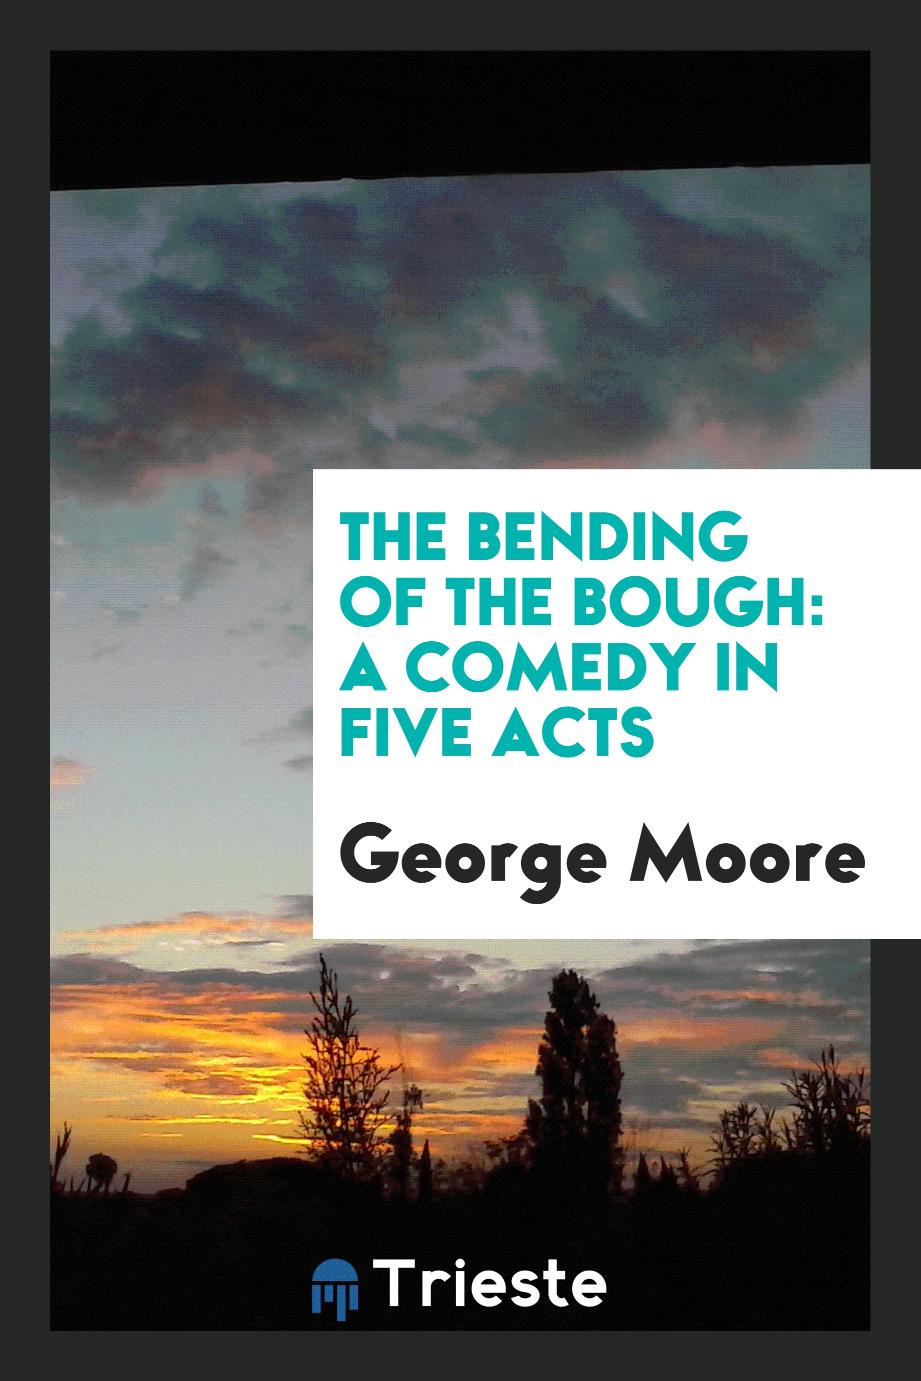 The Bending of the Bough: A Comedy in Five Acts